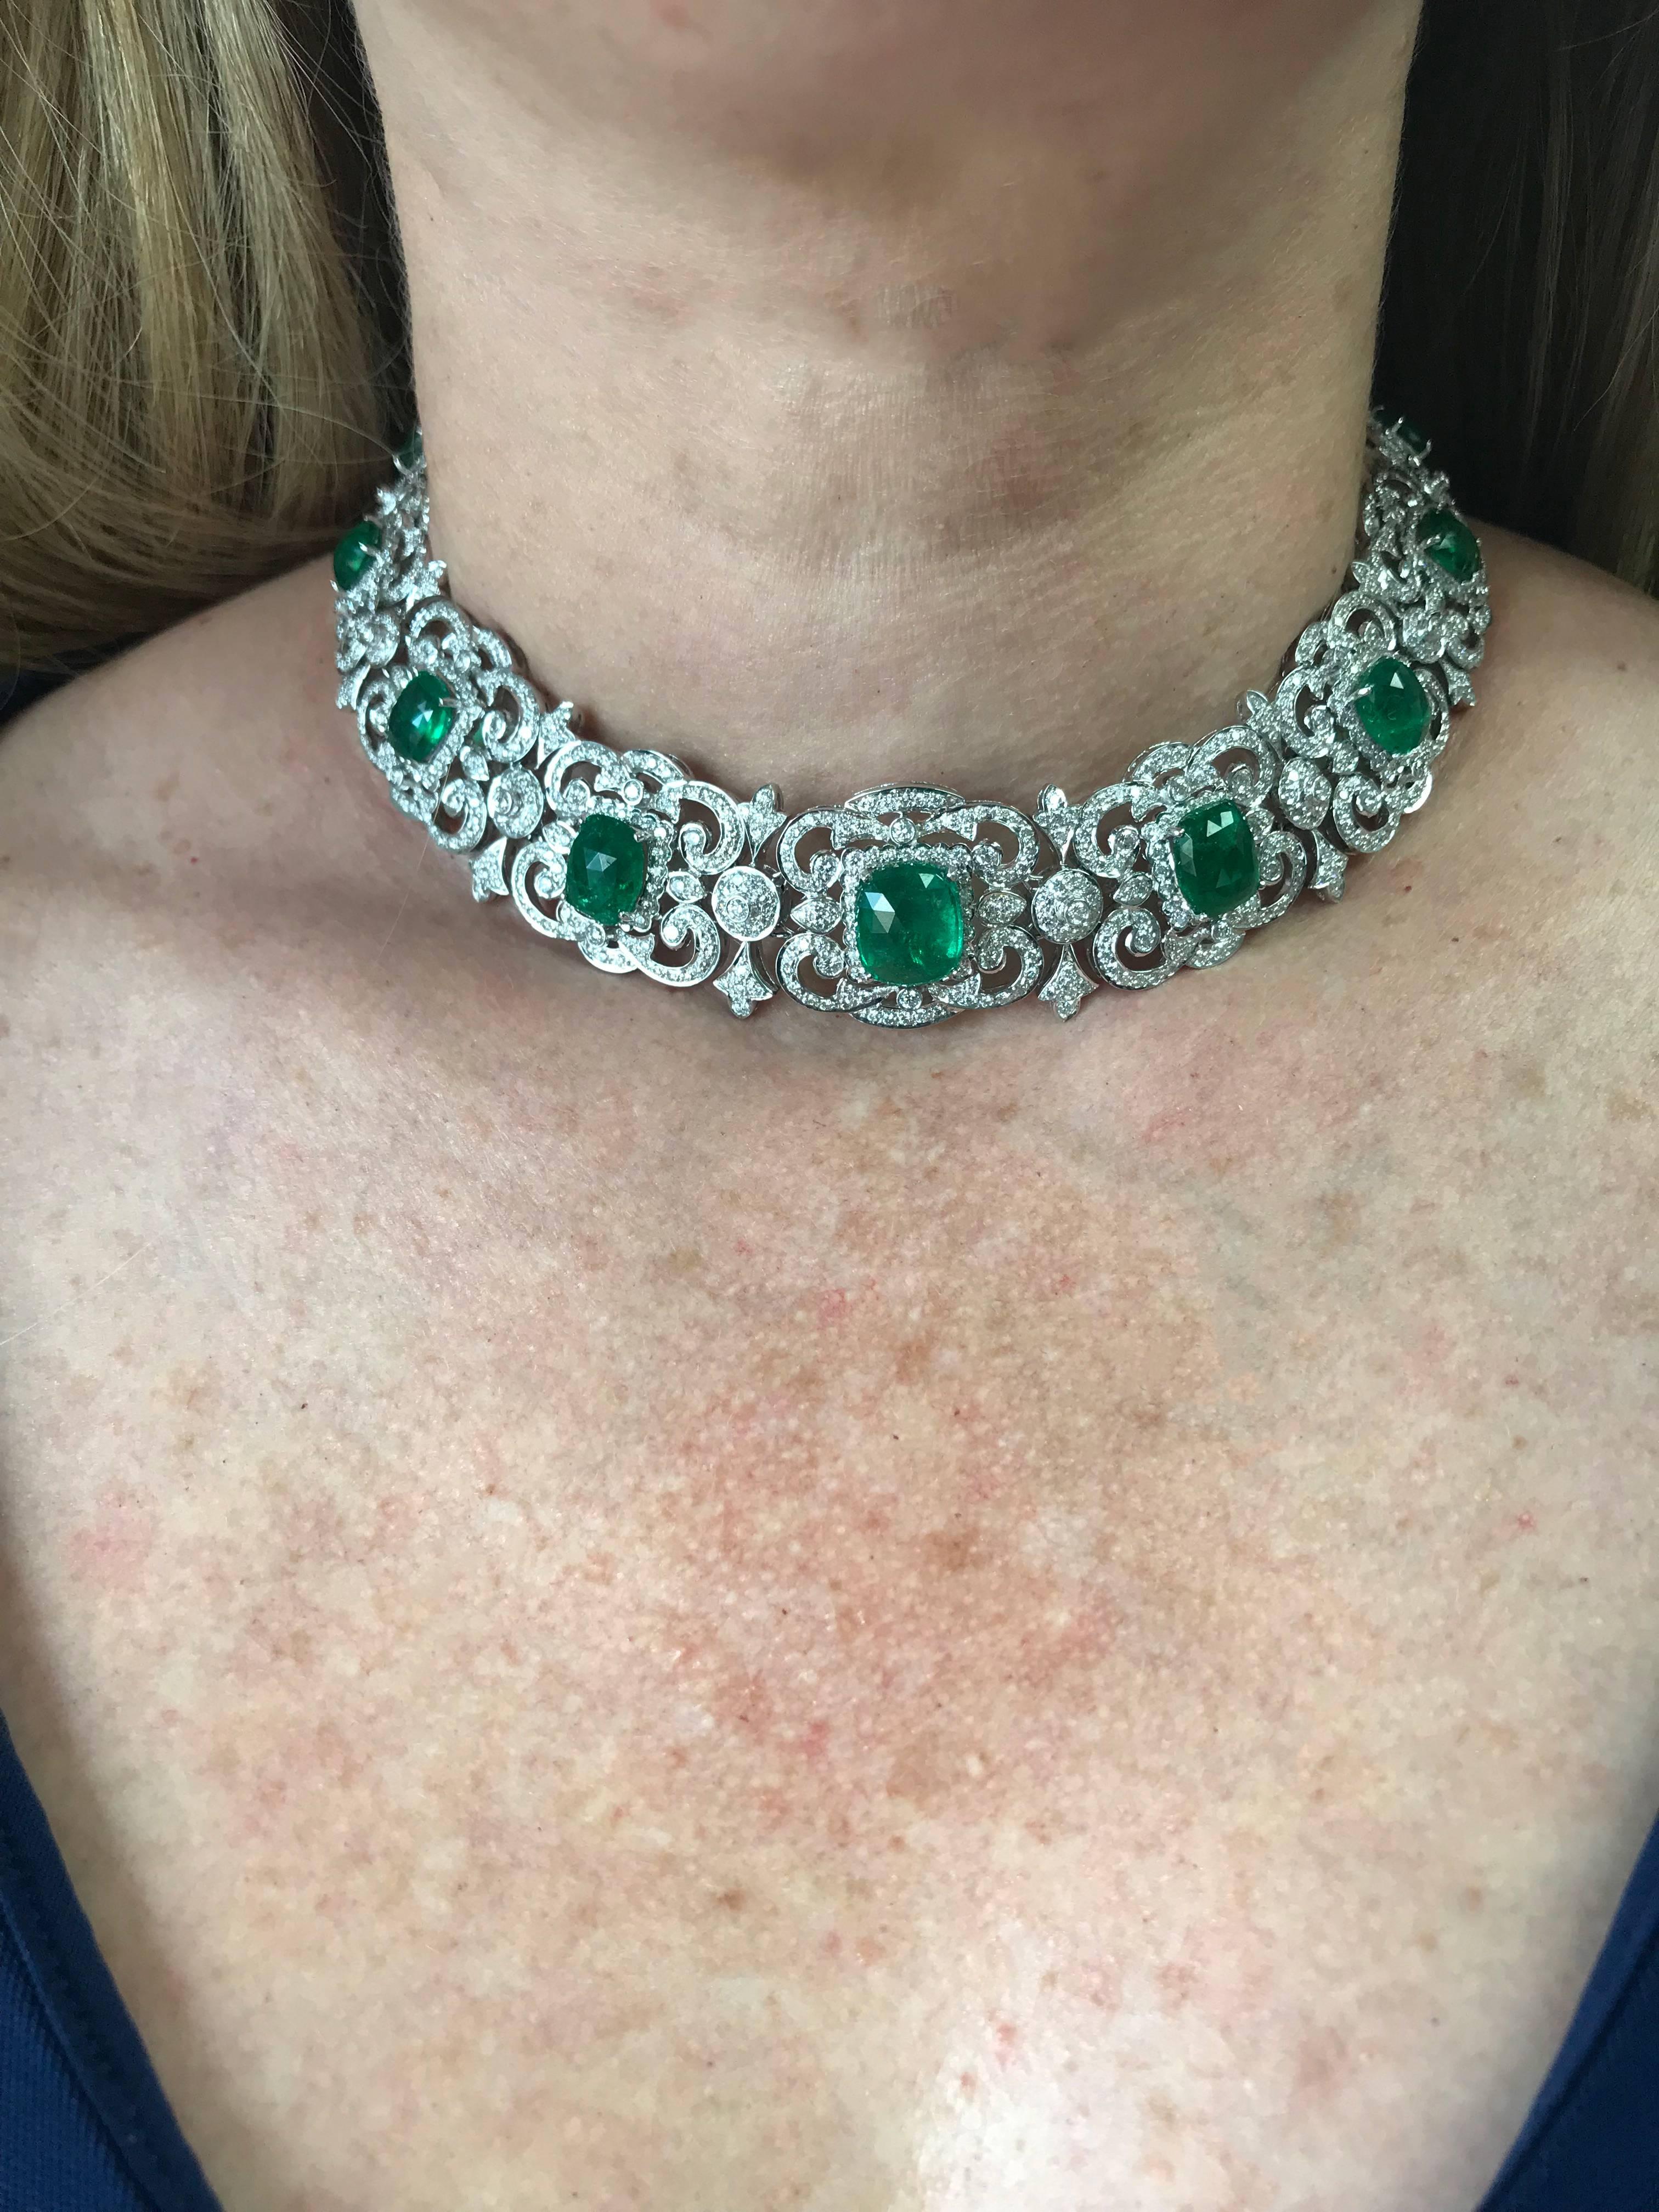 This breathtaking 18K white gold necklace and earring set contains 11 faceted cabochon emeralds weighing approximately 32cts accented by 12.02ct of round brilliant cut diamonds G-H color and VS clarity. Each one of these vibrant Emeralds rests